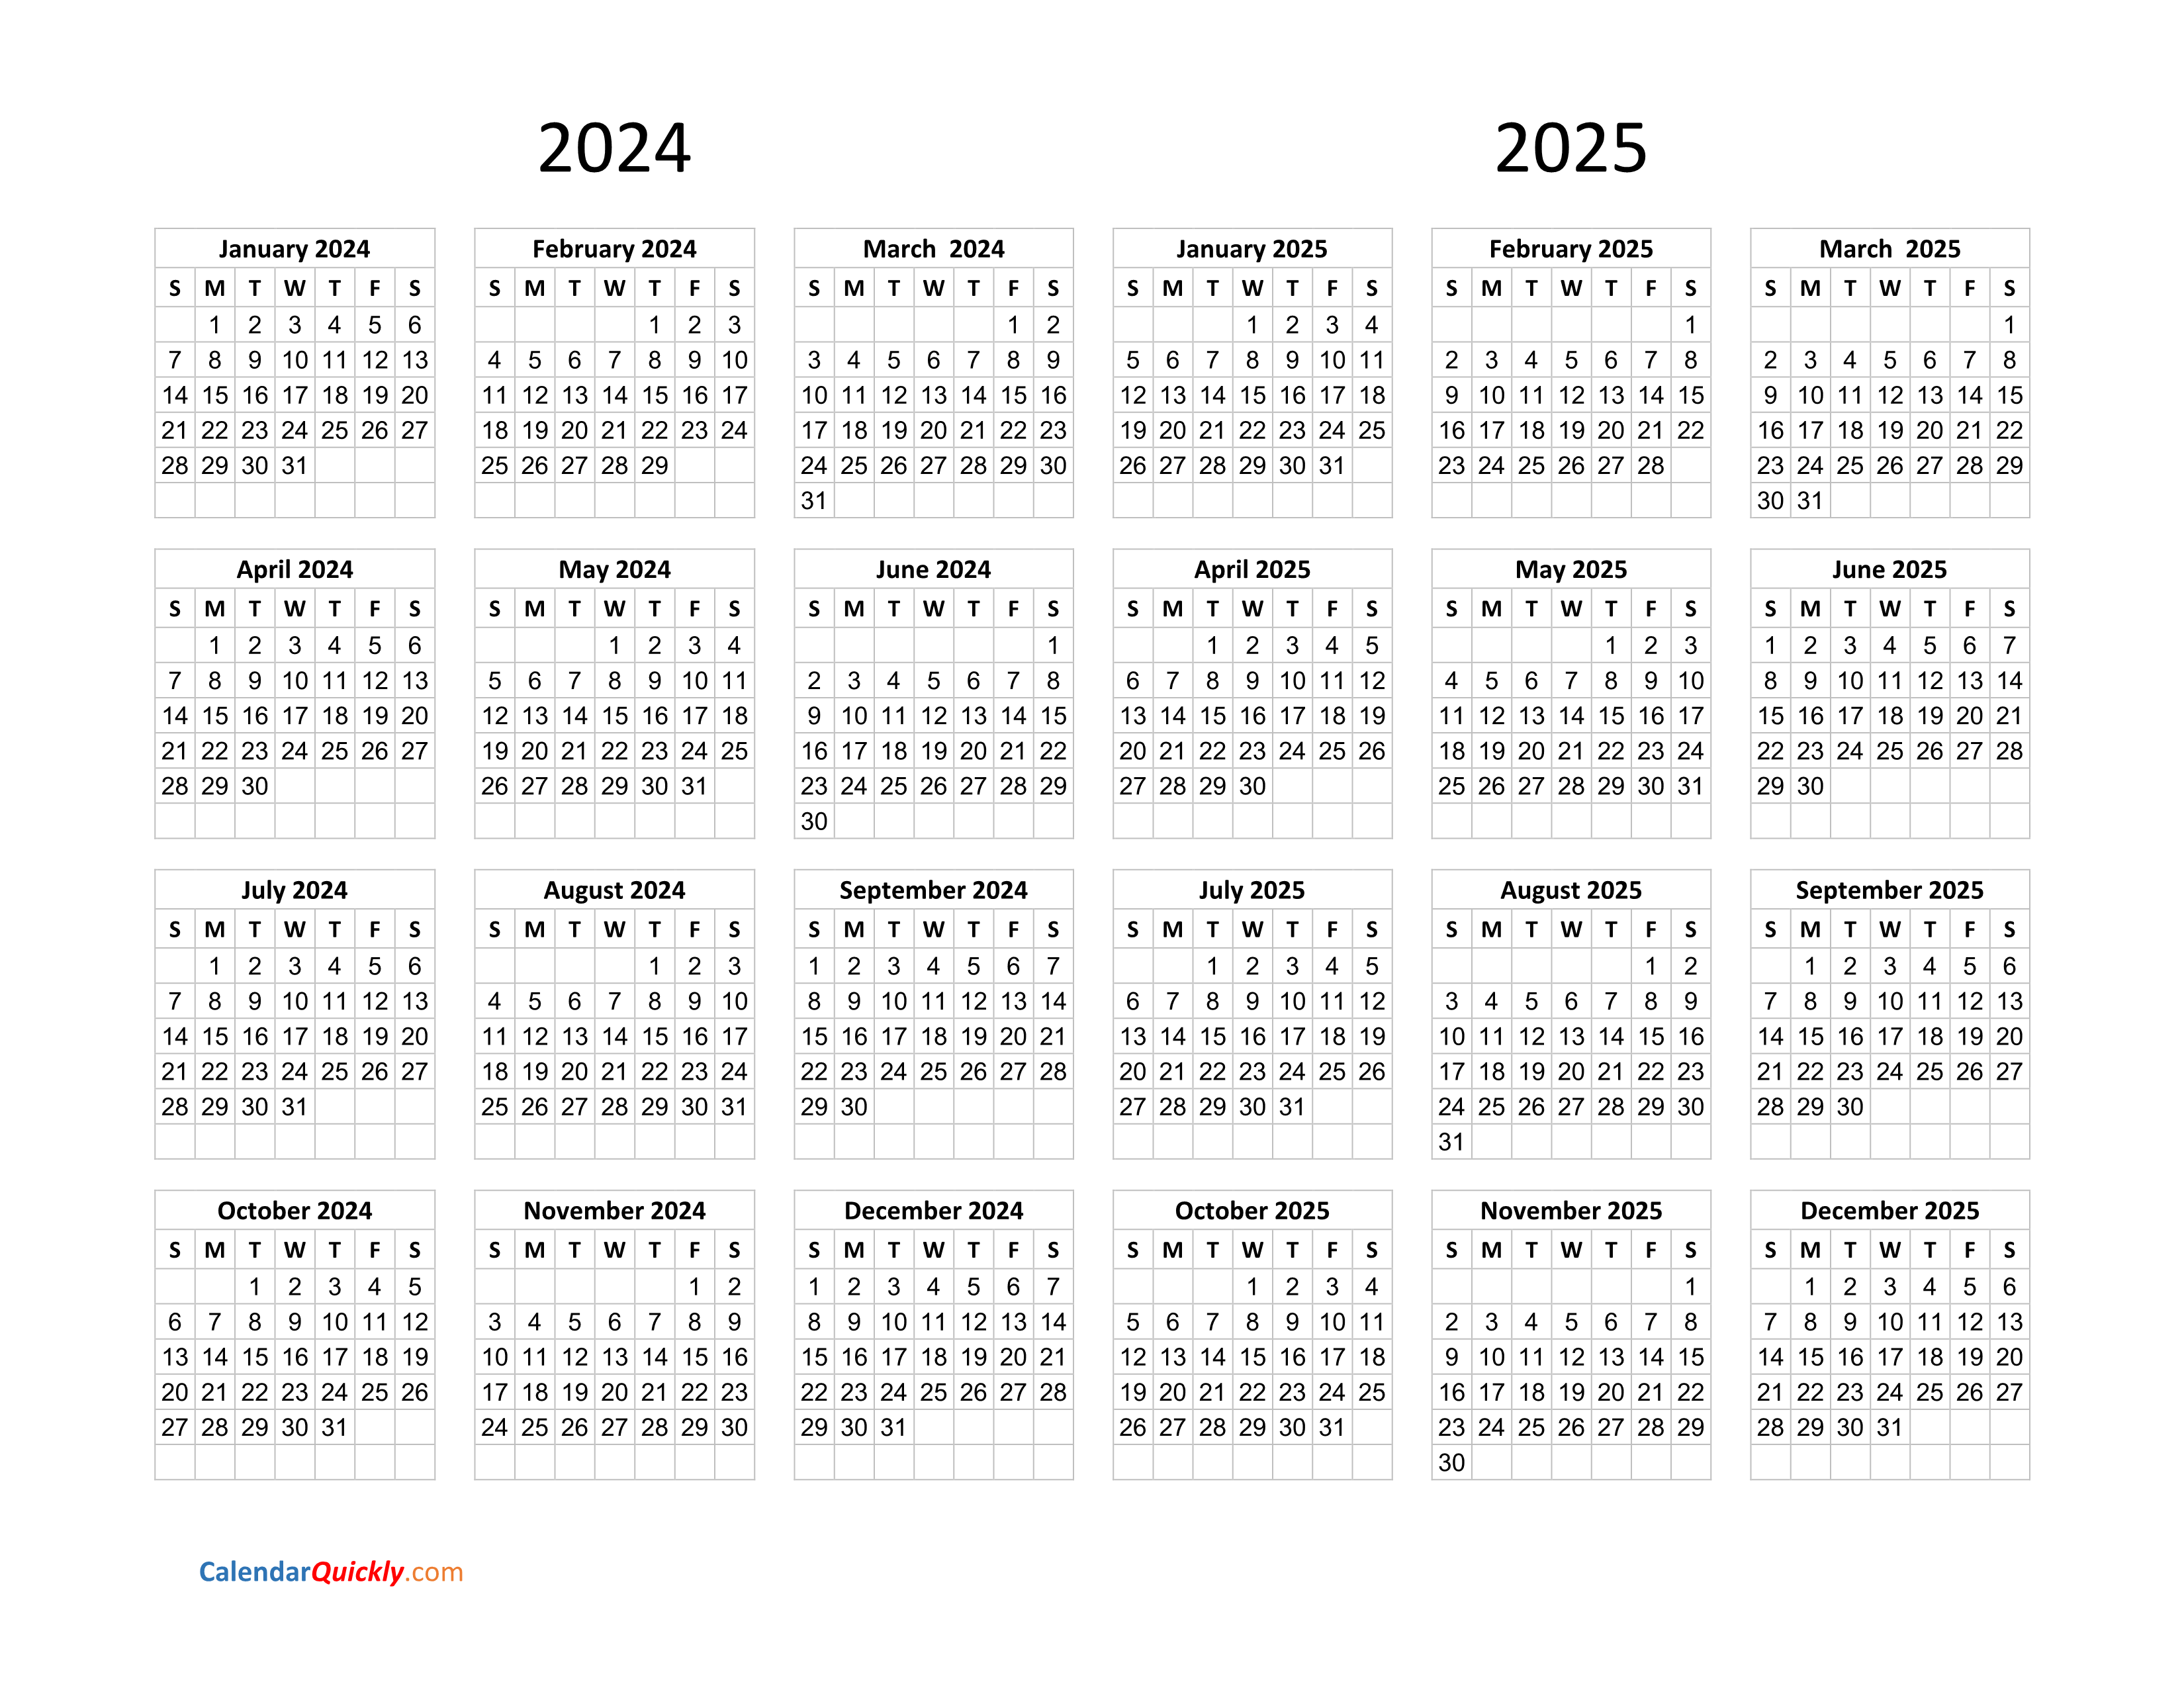 Calendar 2024 and 2025 on One Page | Calendar Quickly